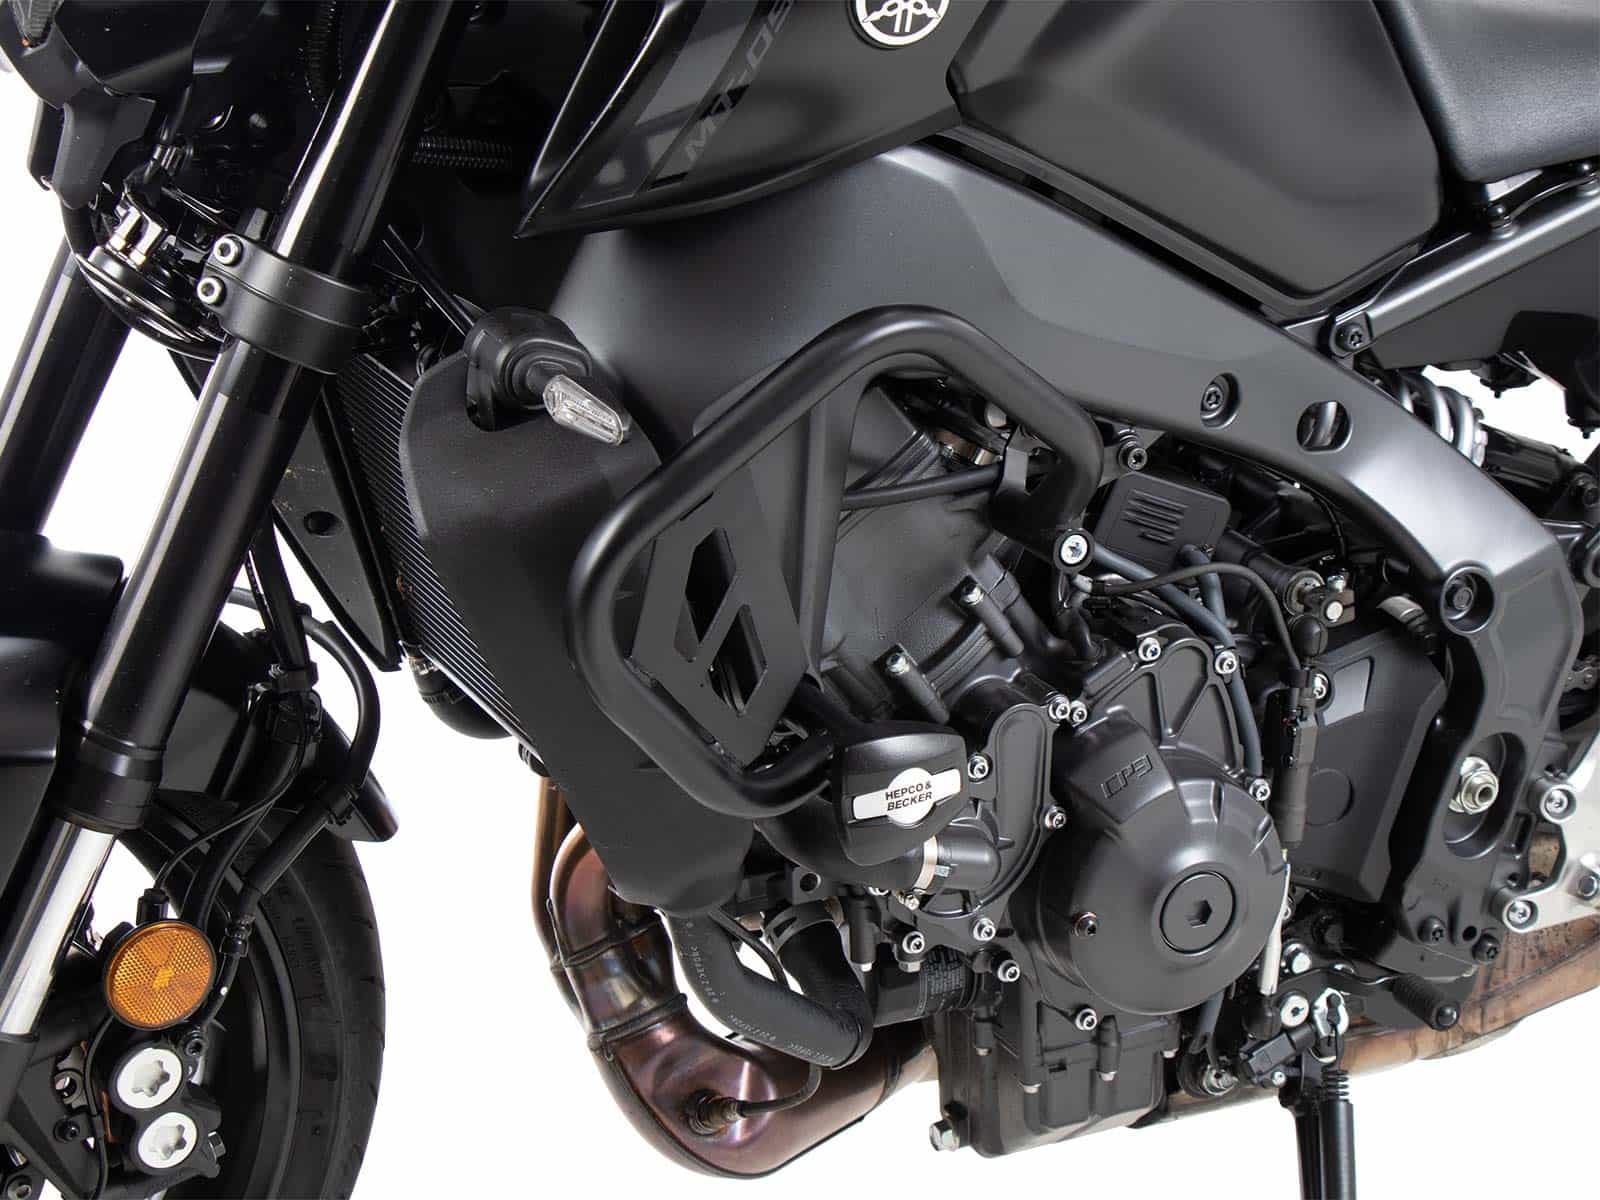 Engine protection bar black incl. protection pads for Yamaha MT-09/SP (2021-2023)